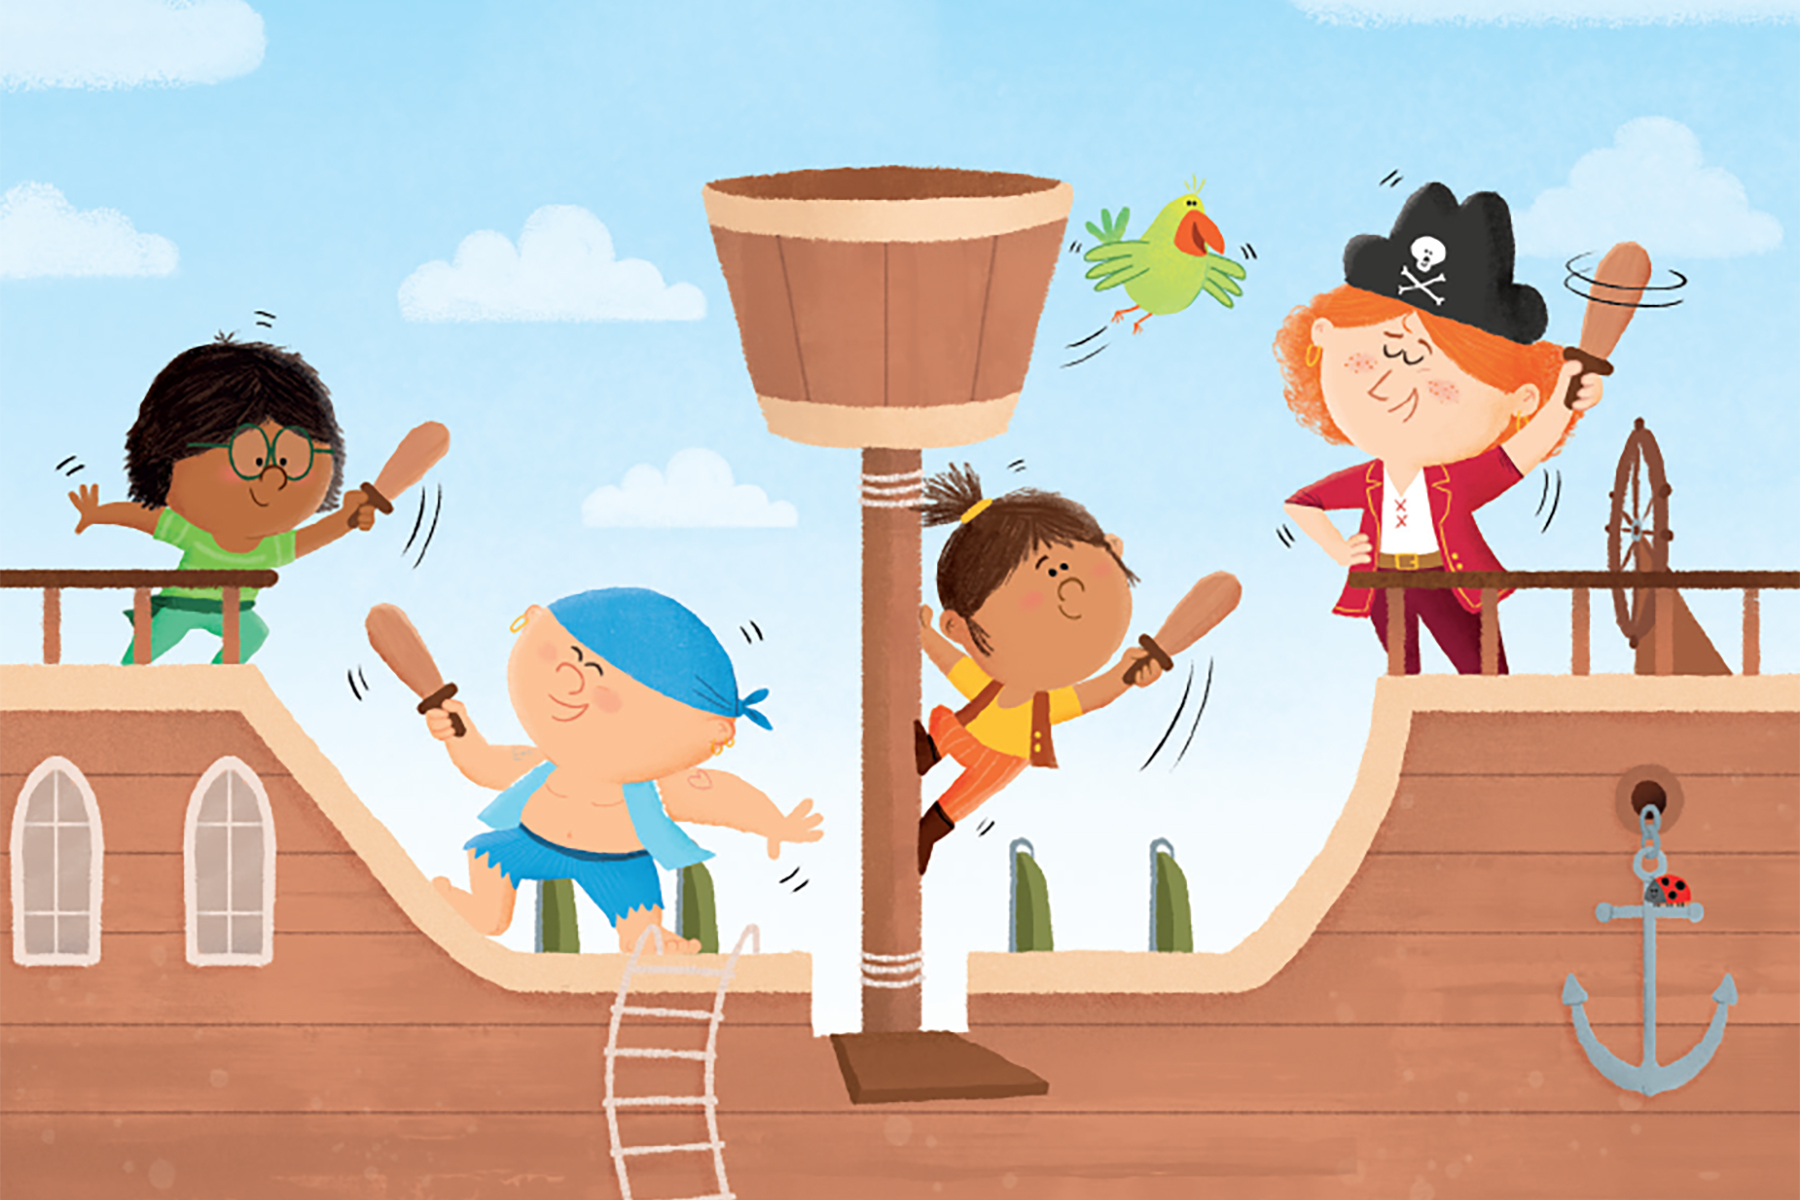 An illustration by Tony Neal of four children on a pirate ship swishing their pirate swords